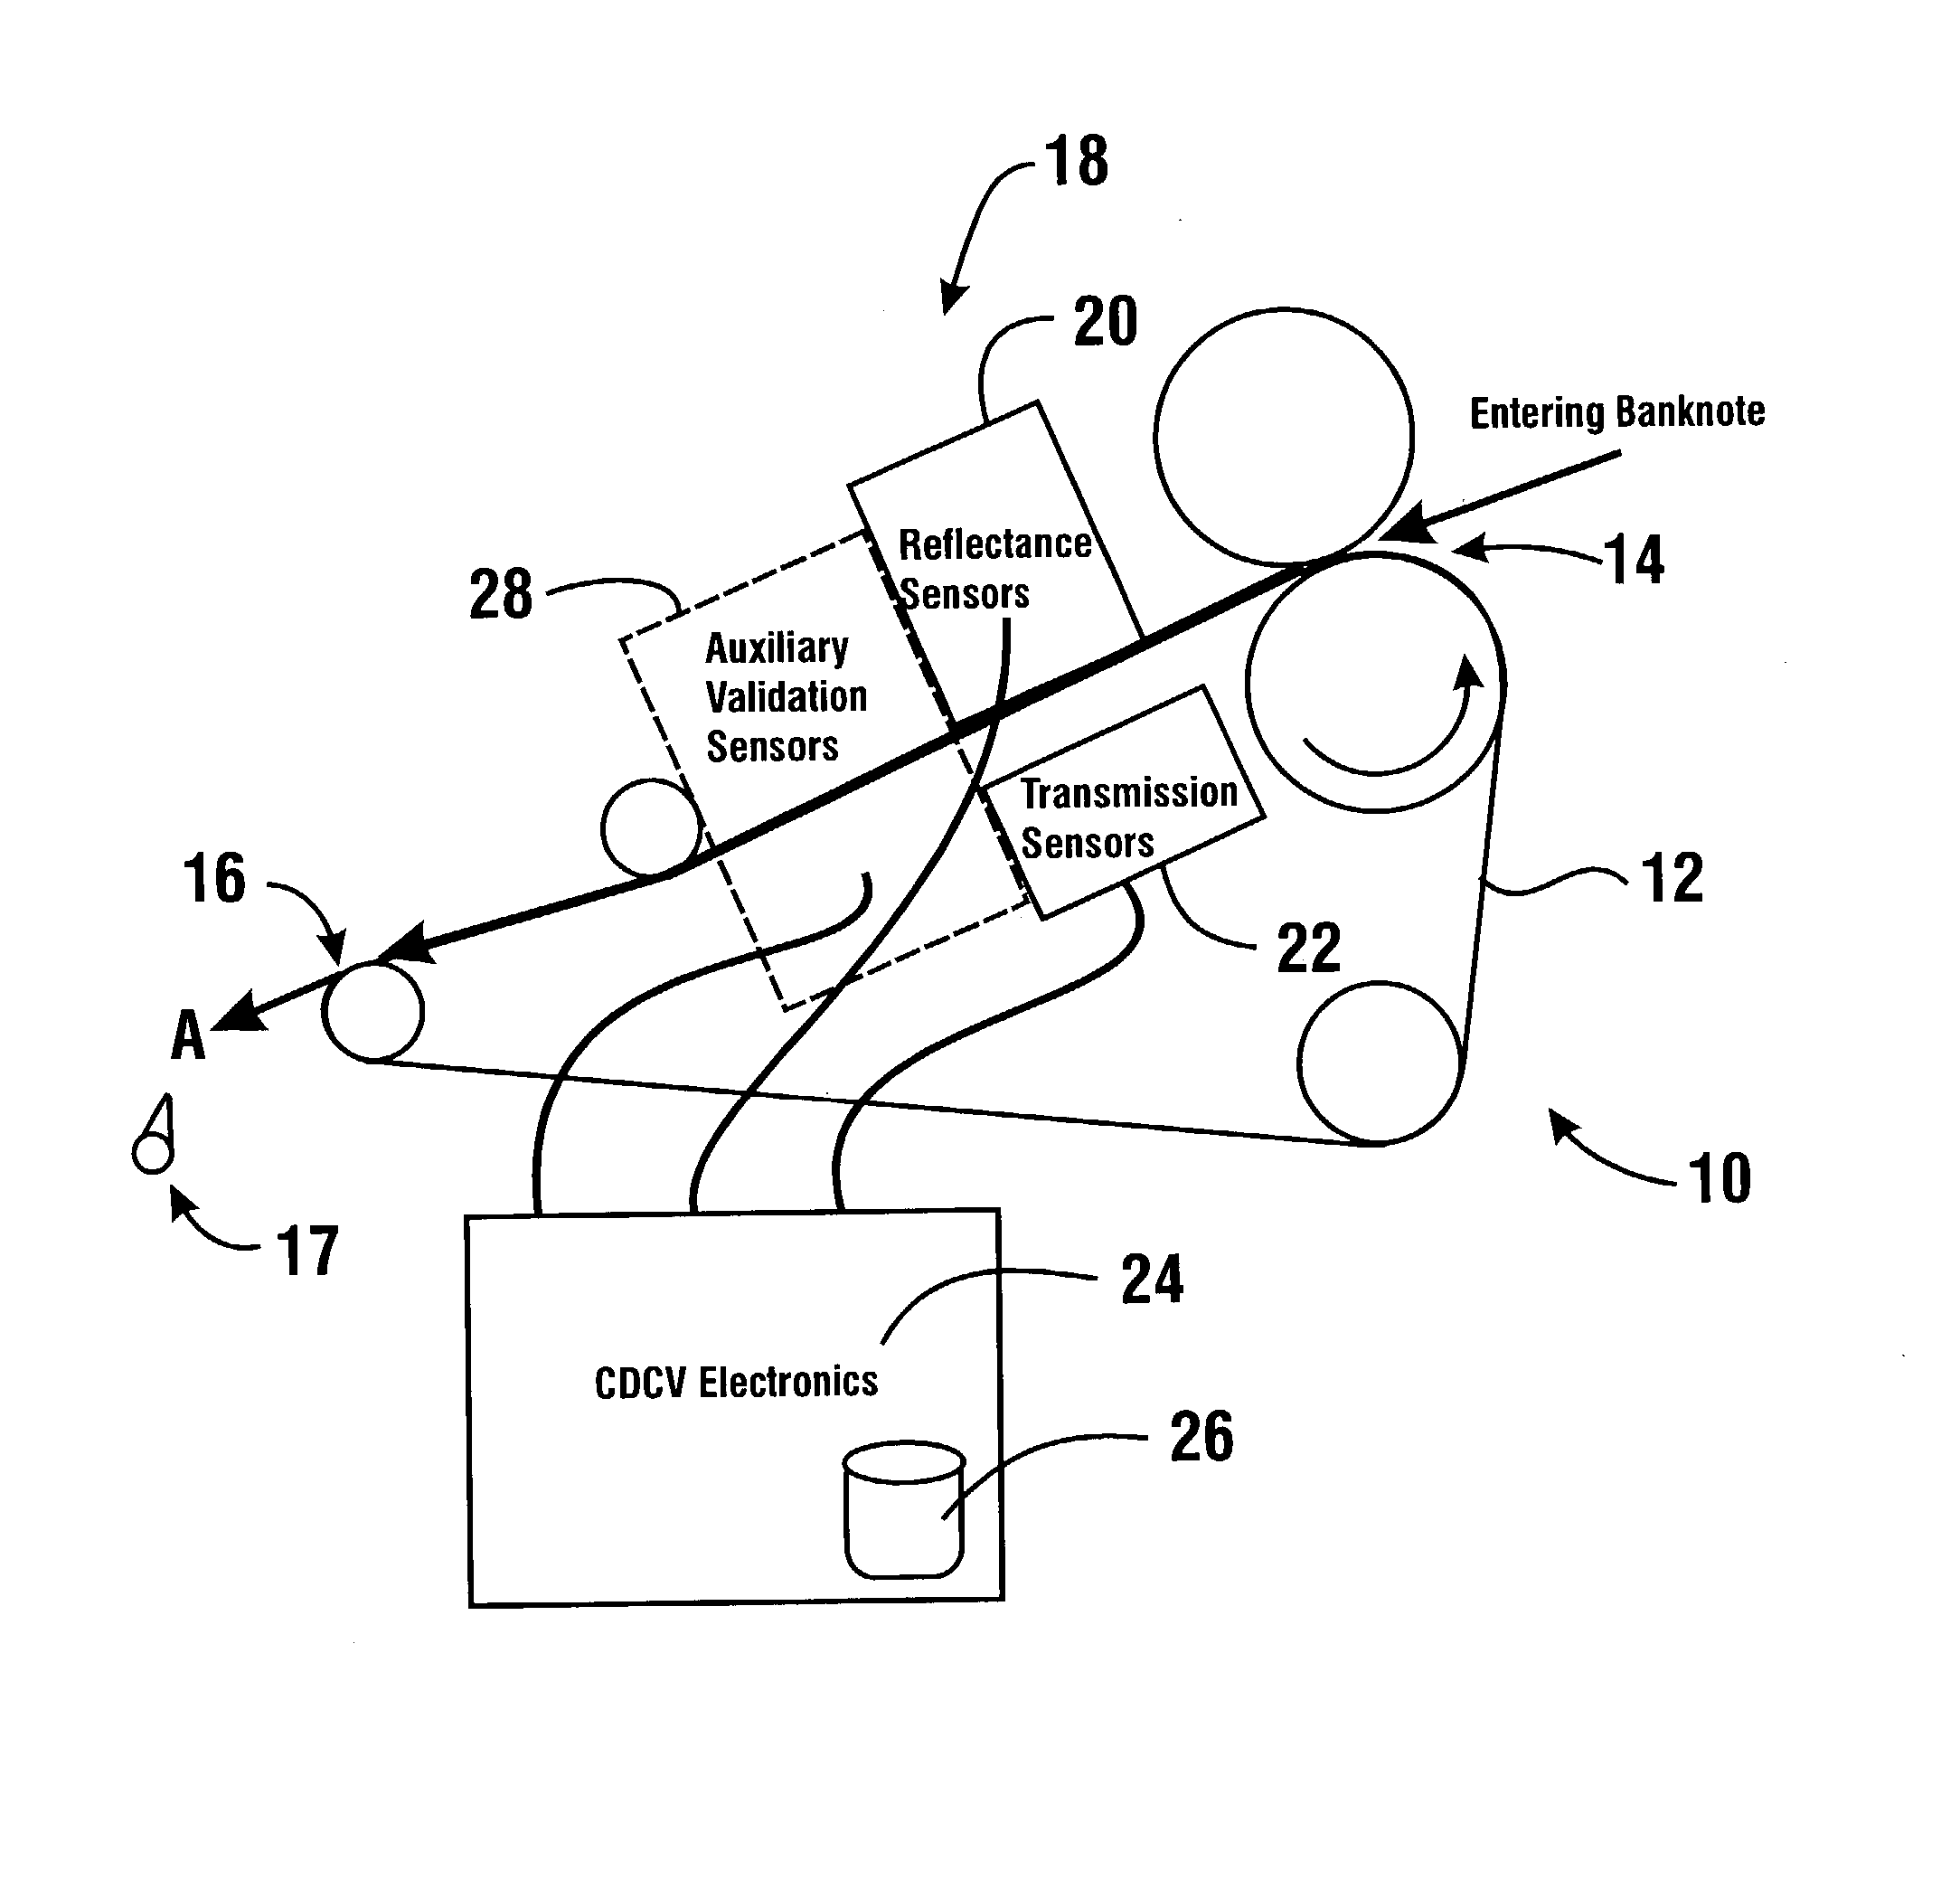 Apparatus and method for correlating a suspect note deposited in an automated banking machine with the depositor